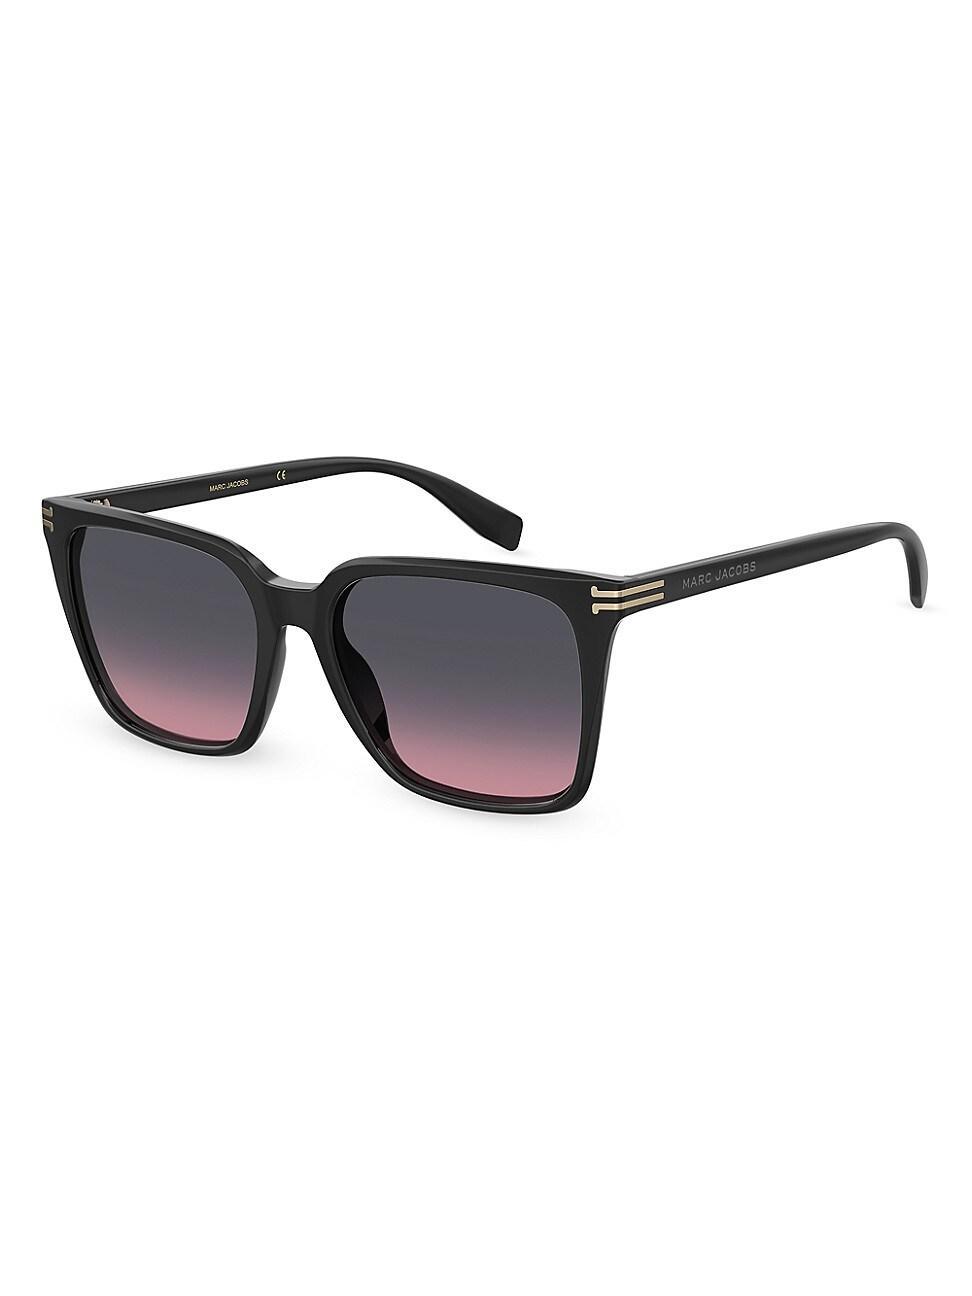 Marc Jacobs 55mm Square Sunglasses Product Image